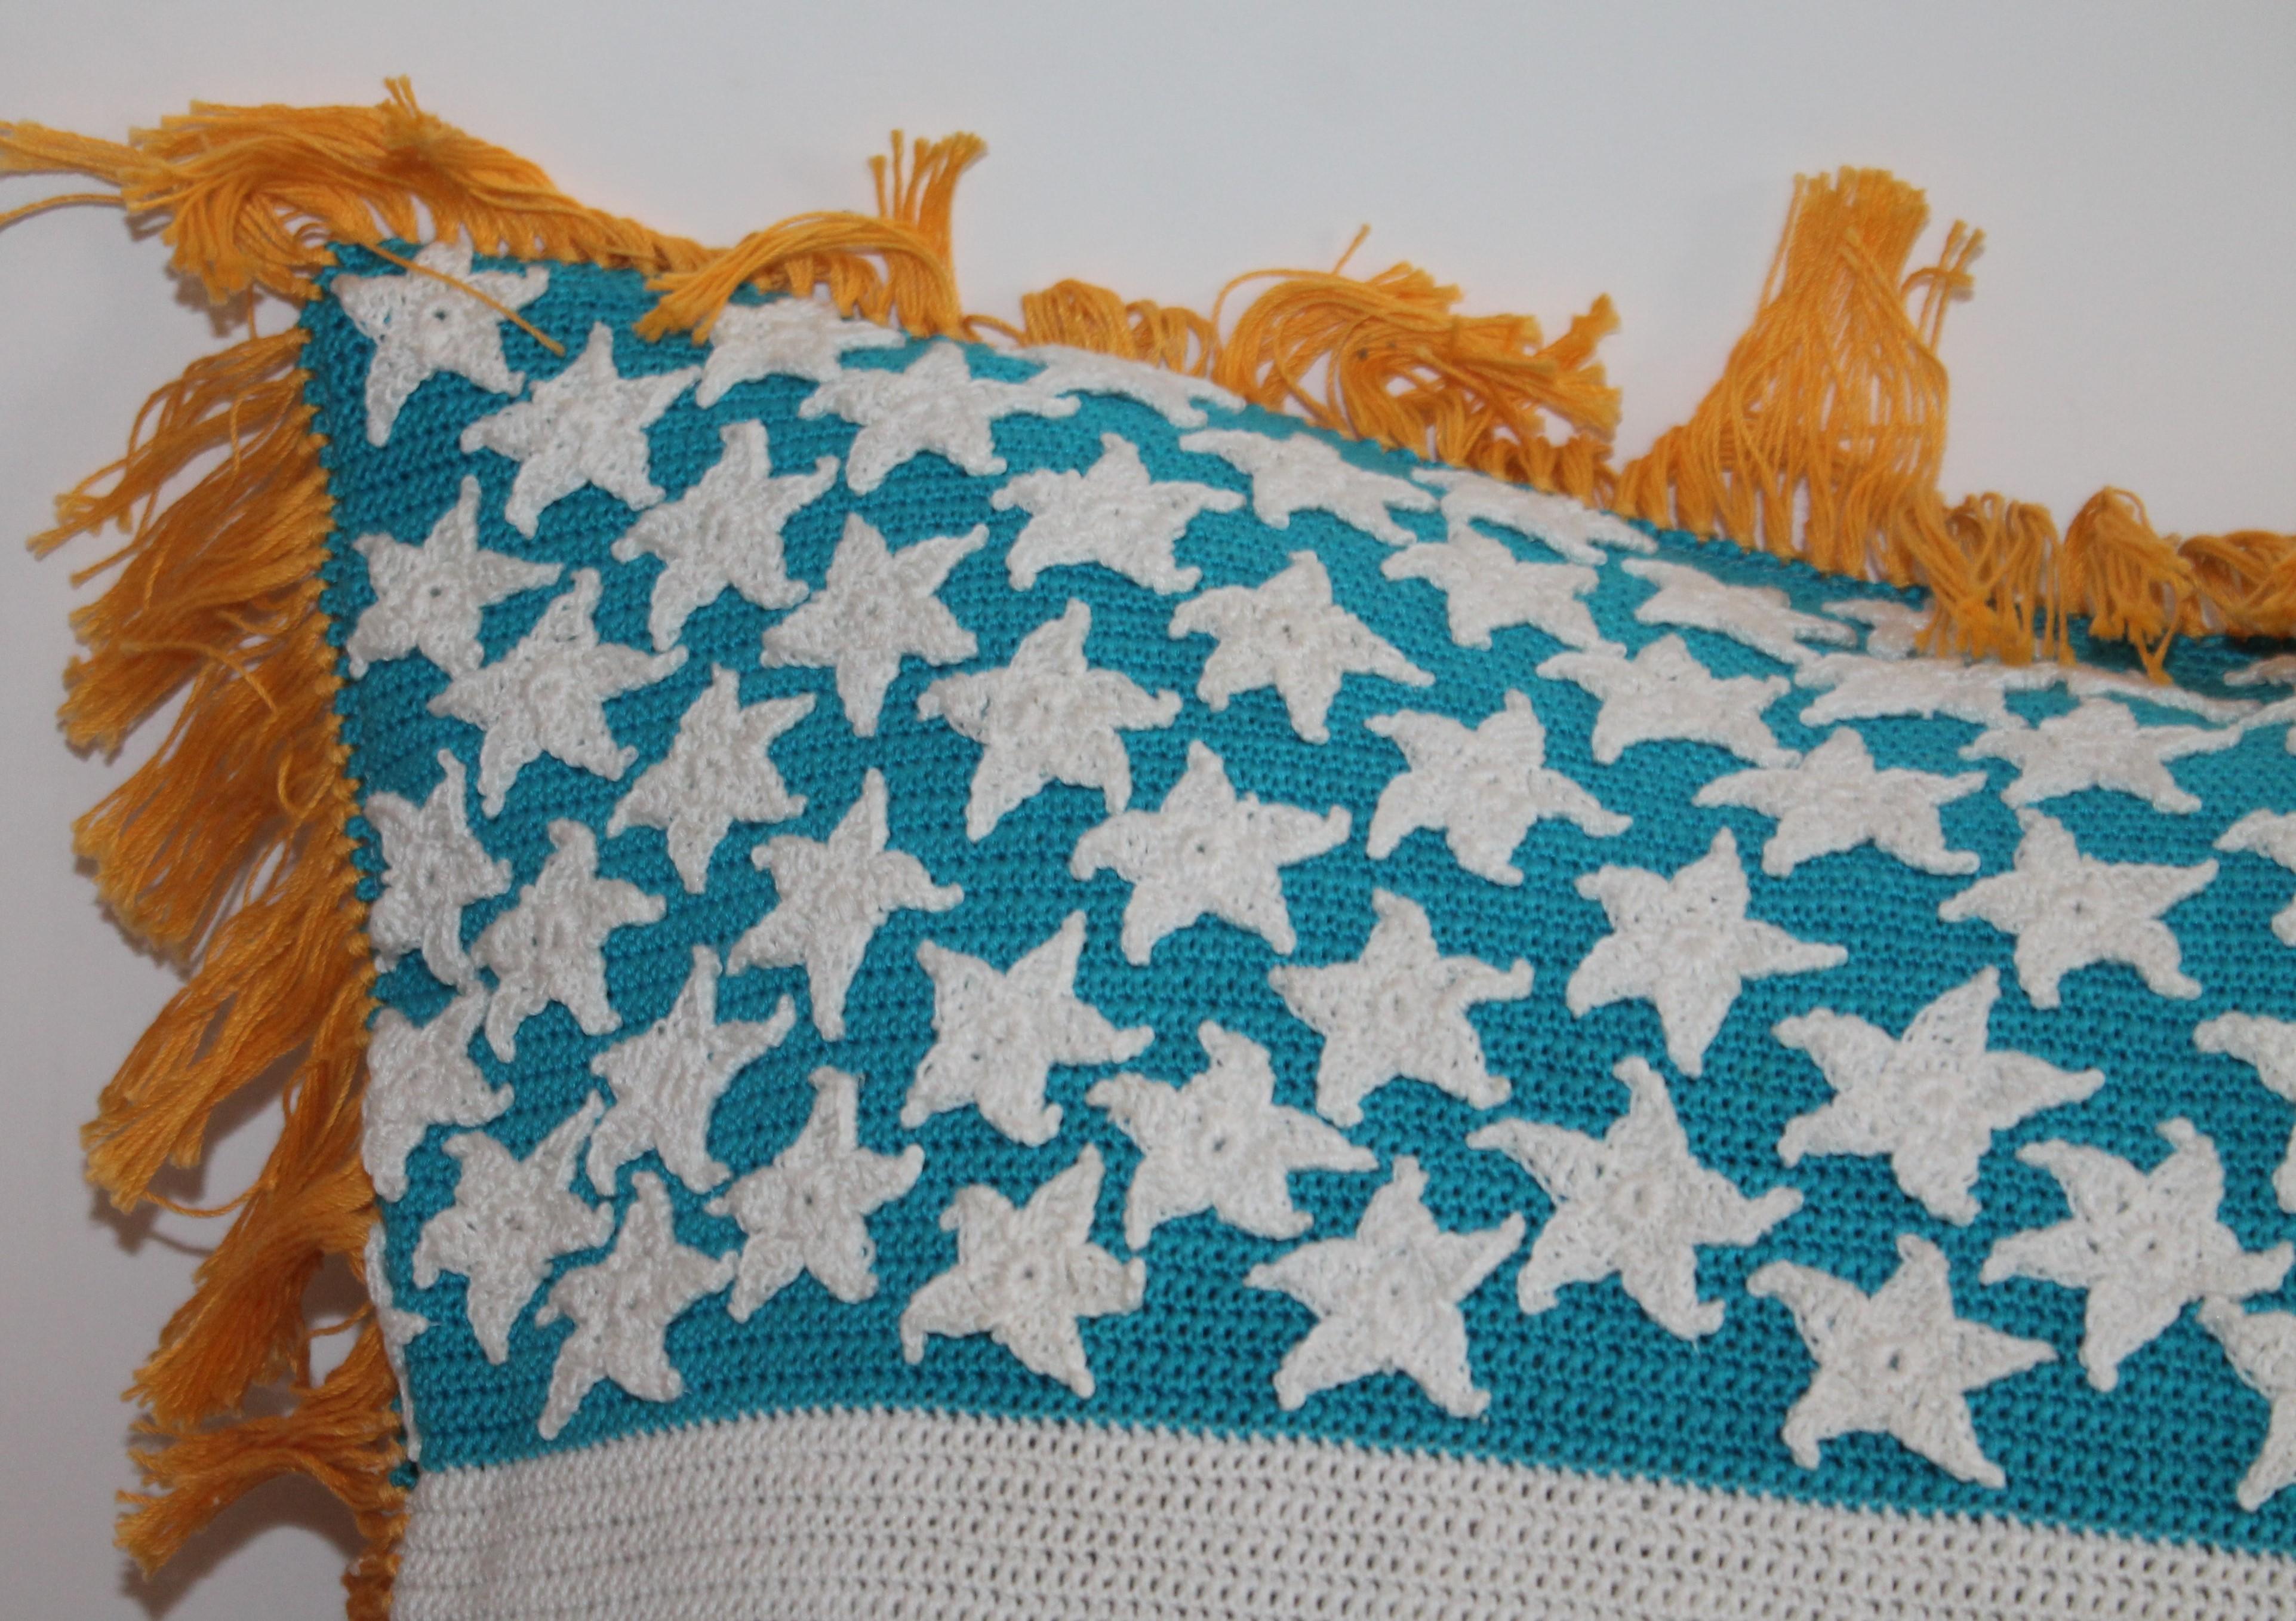 Hand crochet vintage flag with hand appliqued stars and original fringe. The backing is in antique homespun linen. The fill is down and feather fill.